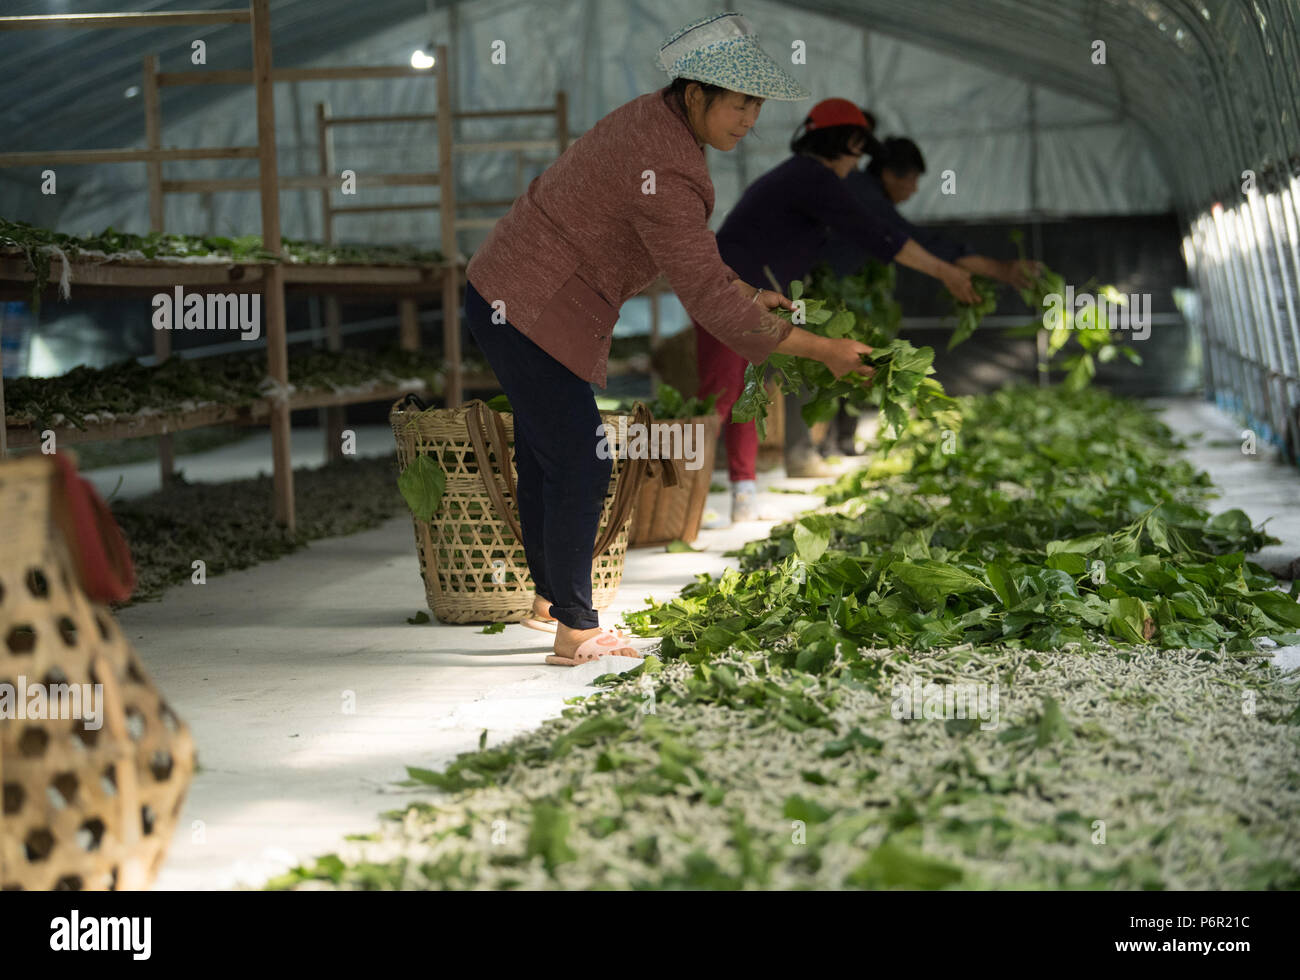 Chun'an, China's Zhejiang Province. 9th May, 2018. Workers feed silkworms with mulberry leaves at a silkworm breeding base of Cathaya Group in Wangcun Village of Chun'an County, east China's Zhejiang Province, May 9, 2018. Chun'an County cooperated with Cathaya Group in building silkworm breeding bases to produce high quality cocoon and silk products. To date, about 4,000 hectares mulberry bushes have been cultivated and some 300 tonnes raw silk are produced per year. Credit: Weng Xinyang/Xinhua/Alamy Live News Stock Photo